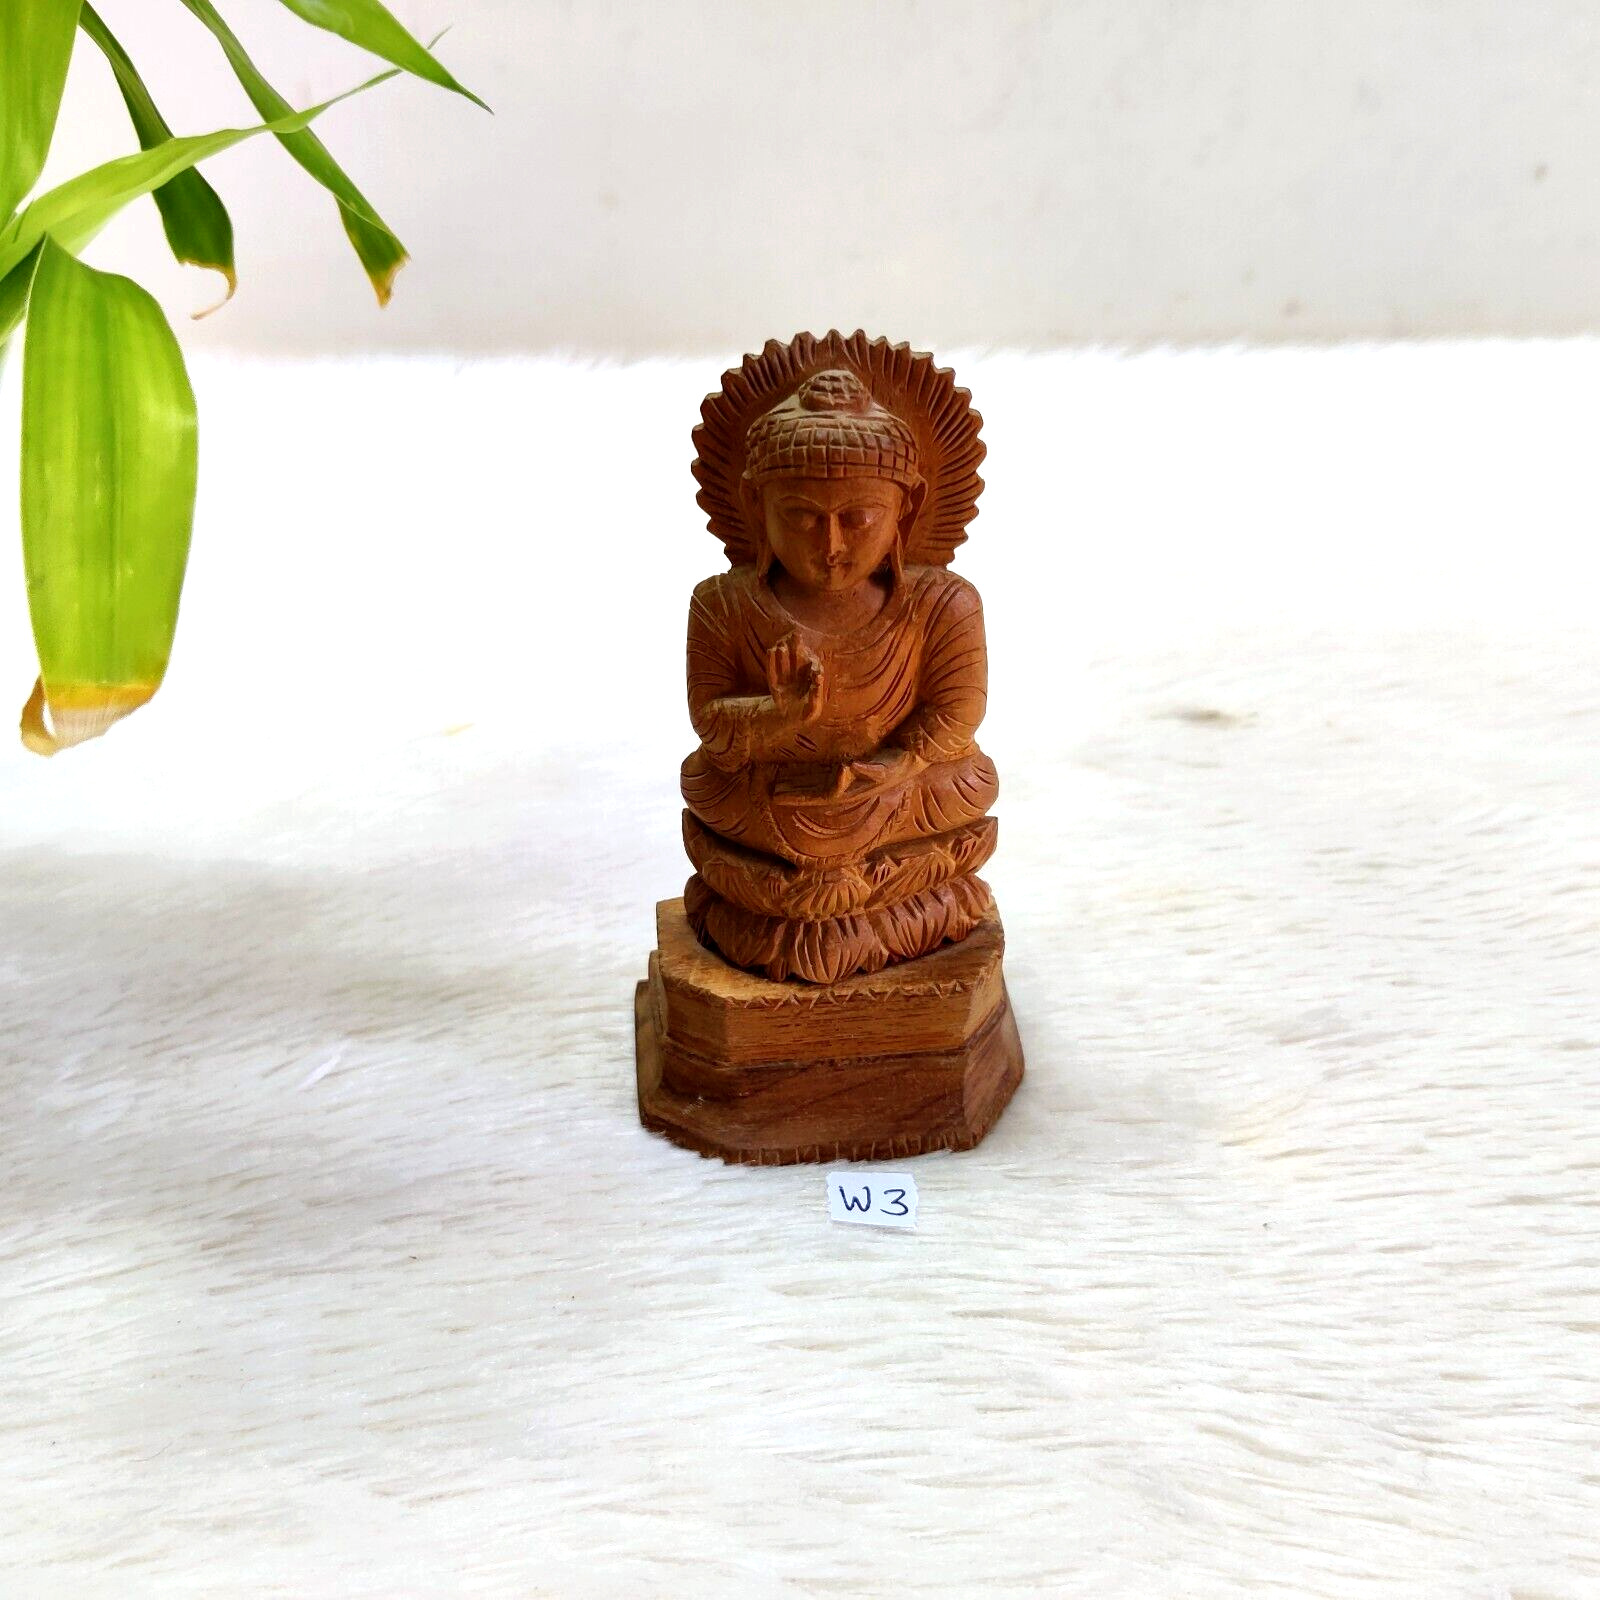 Vintage Handcrafted Lord Buddha Sandal Wood Figure Old Decorative Collectible W3